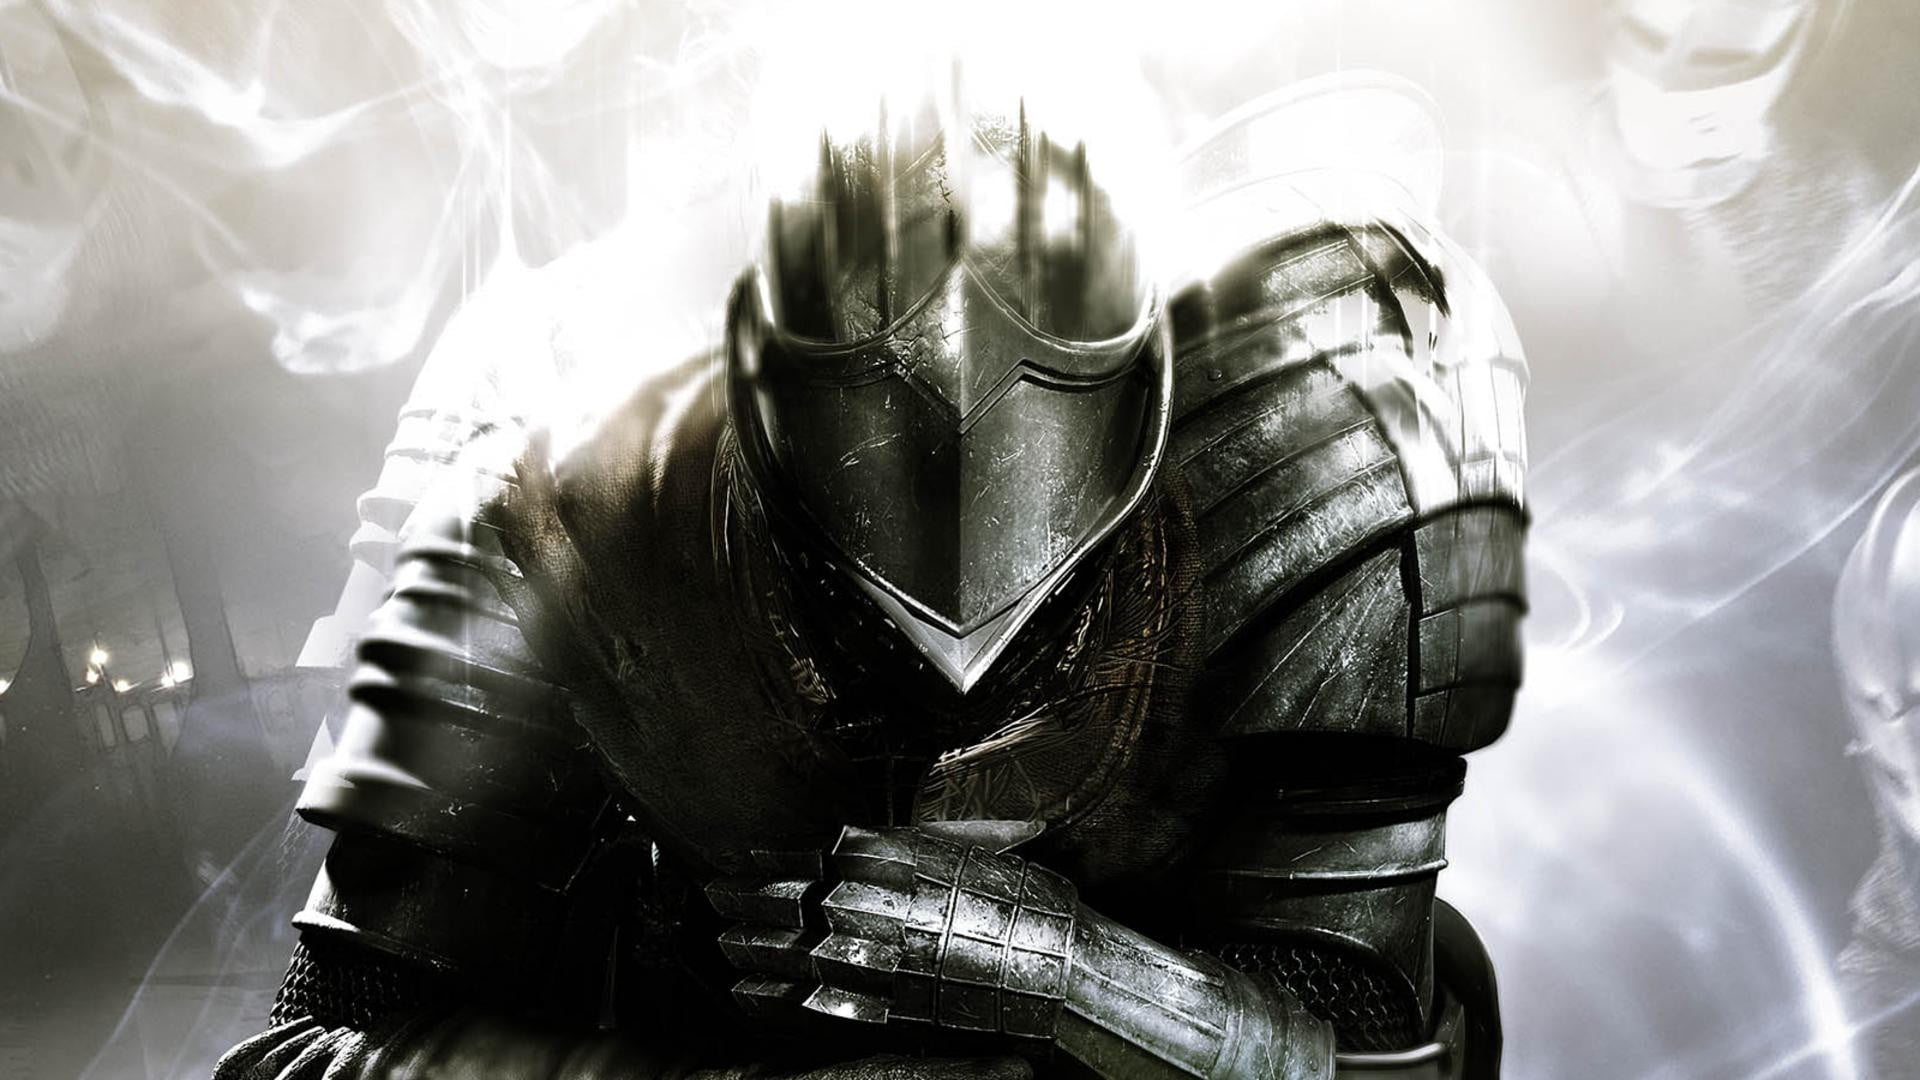 armored knight graphic wallpaper, video games, Demon's Souls, knight